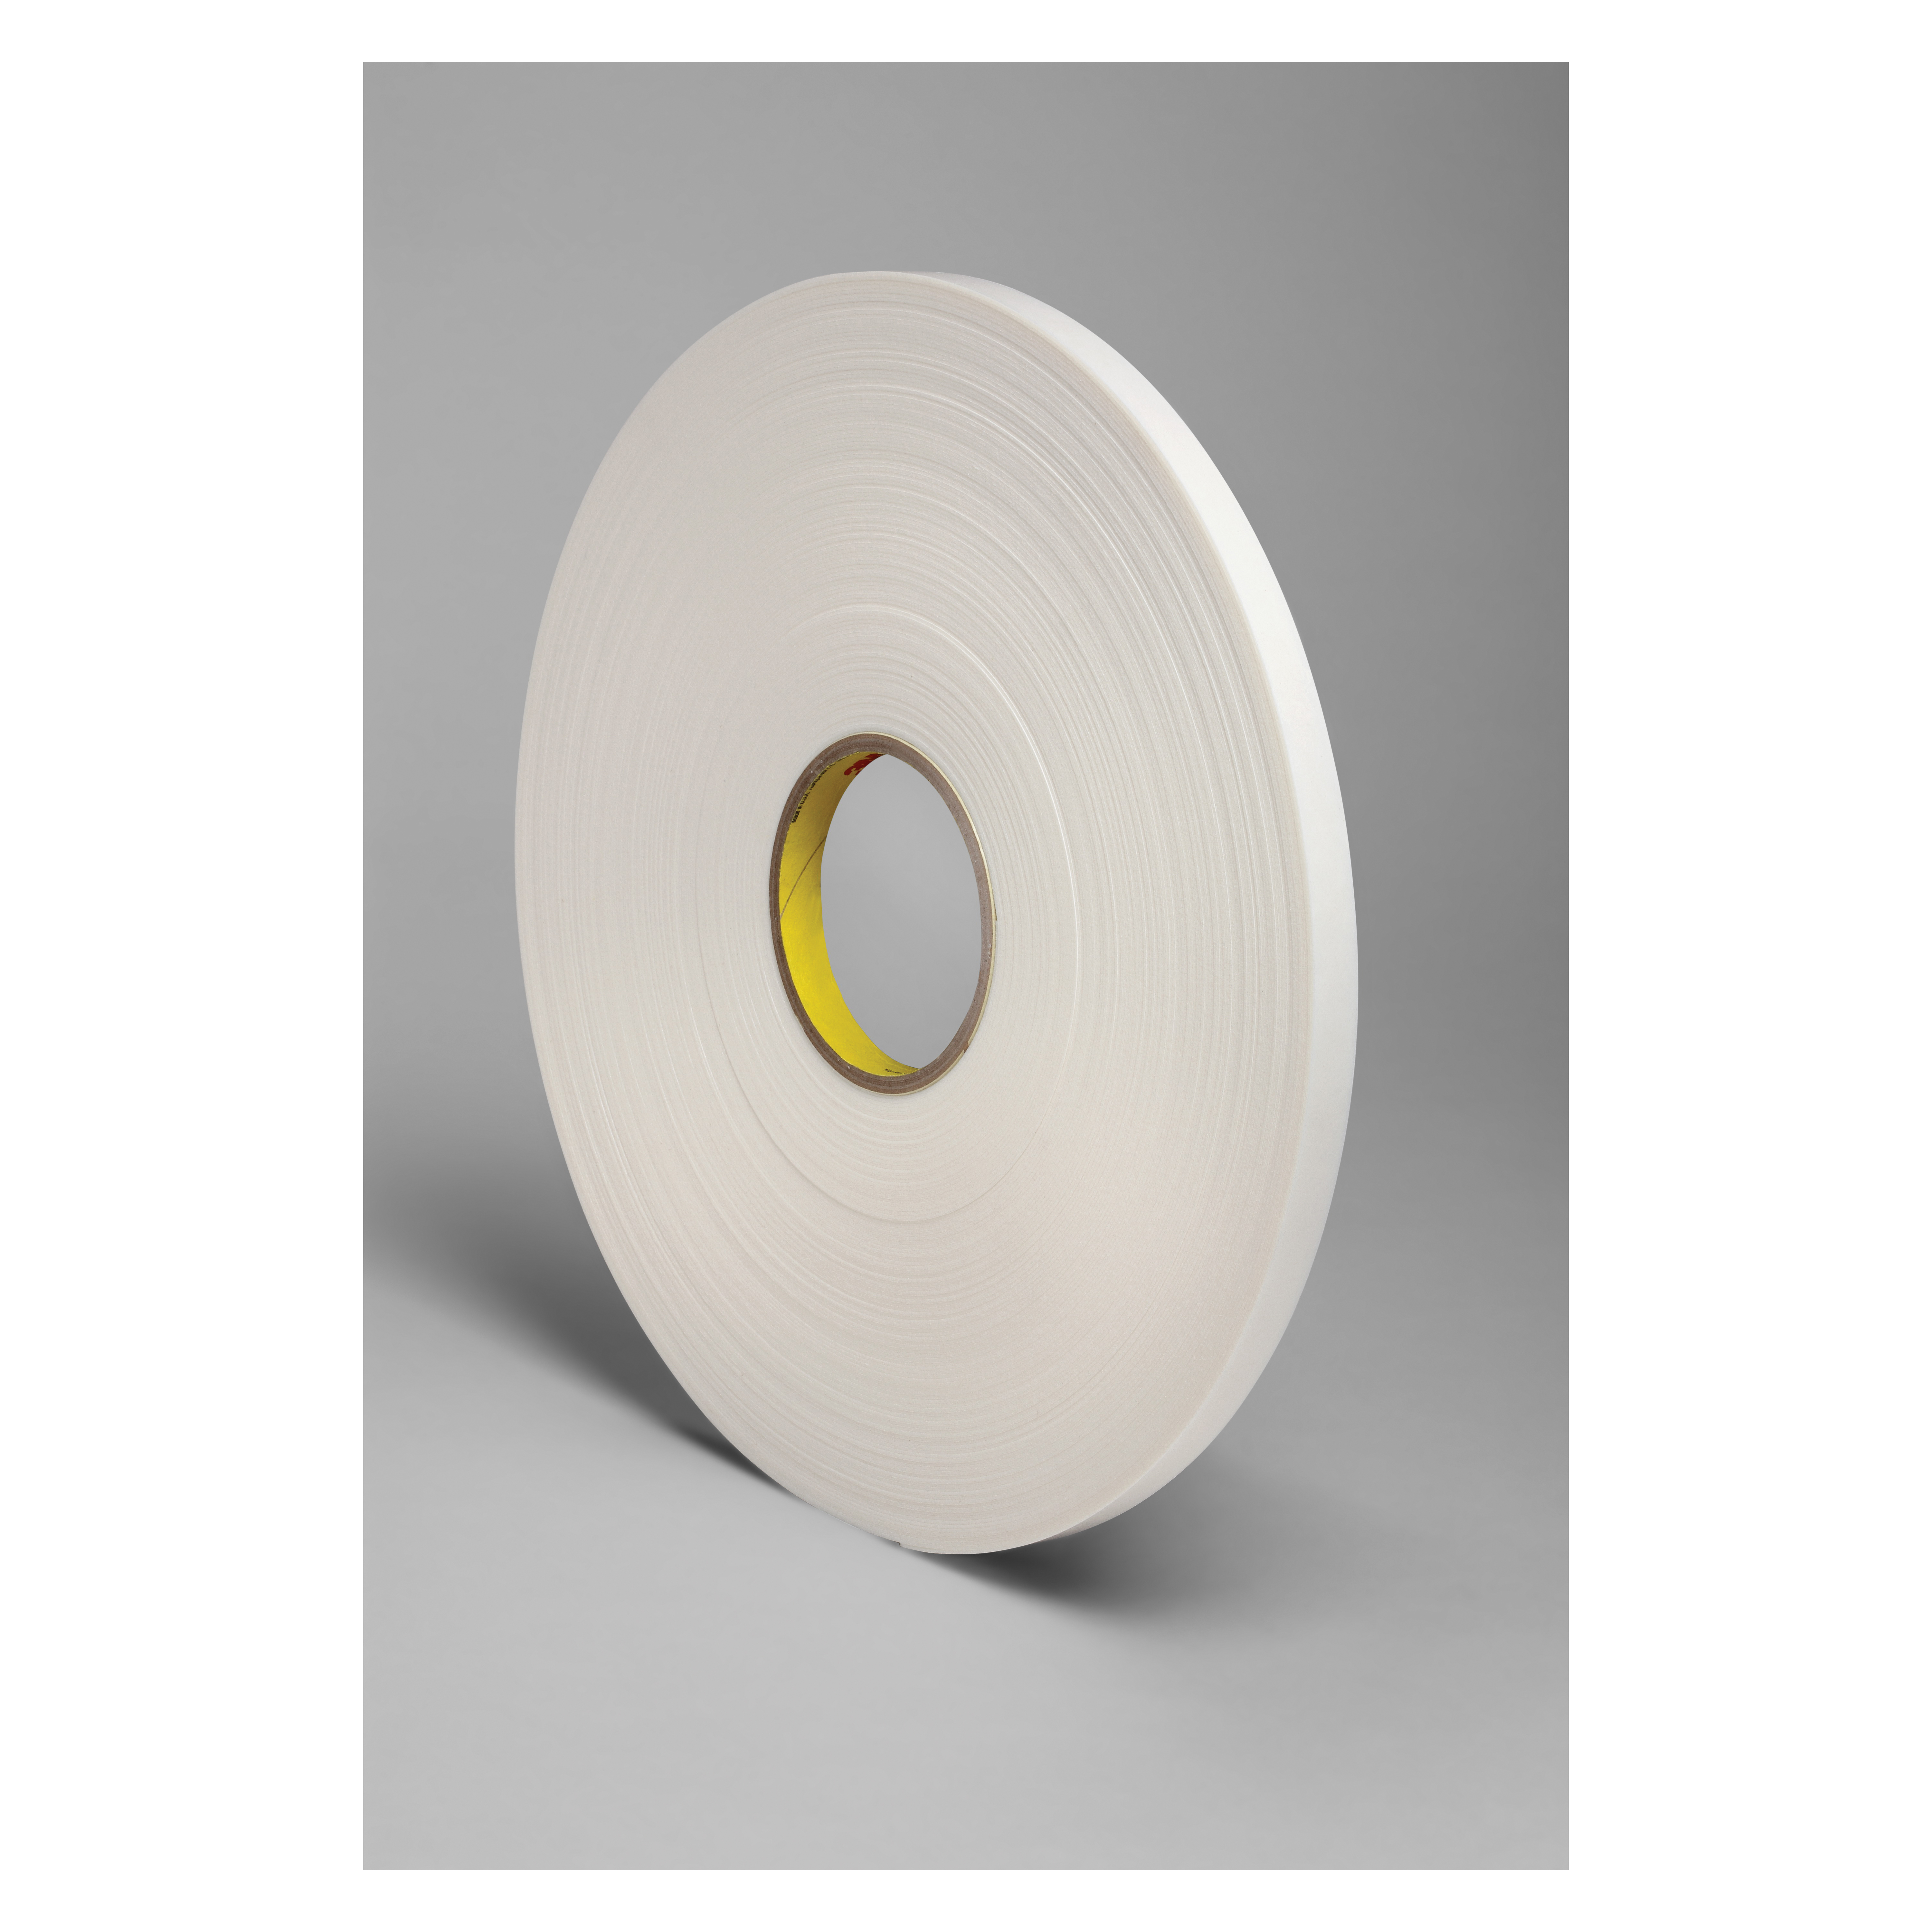 3M™ 021200-03407 Single Coated Foam Tape, 36 yd L x 3/4 in W, 125 mil THK, Acrylic Adhesive, Urethane Foam Backing, Natural